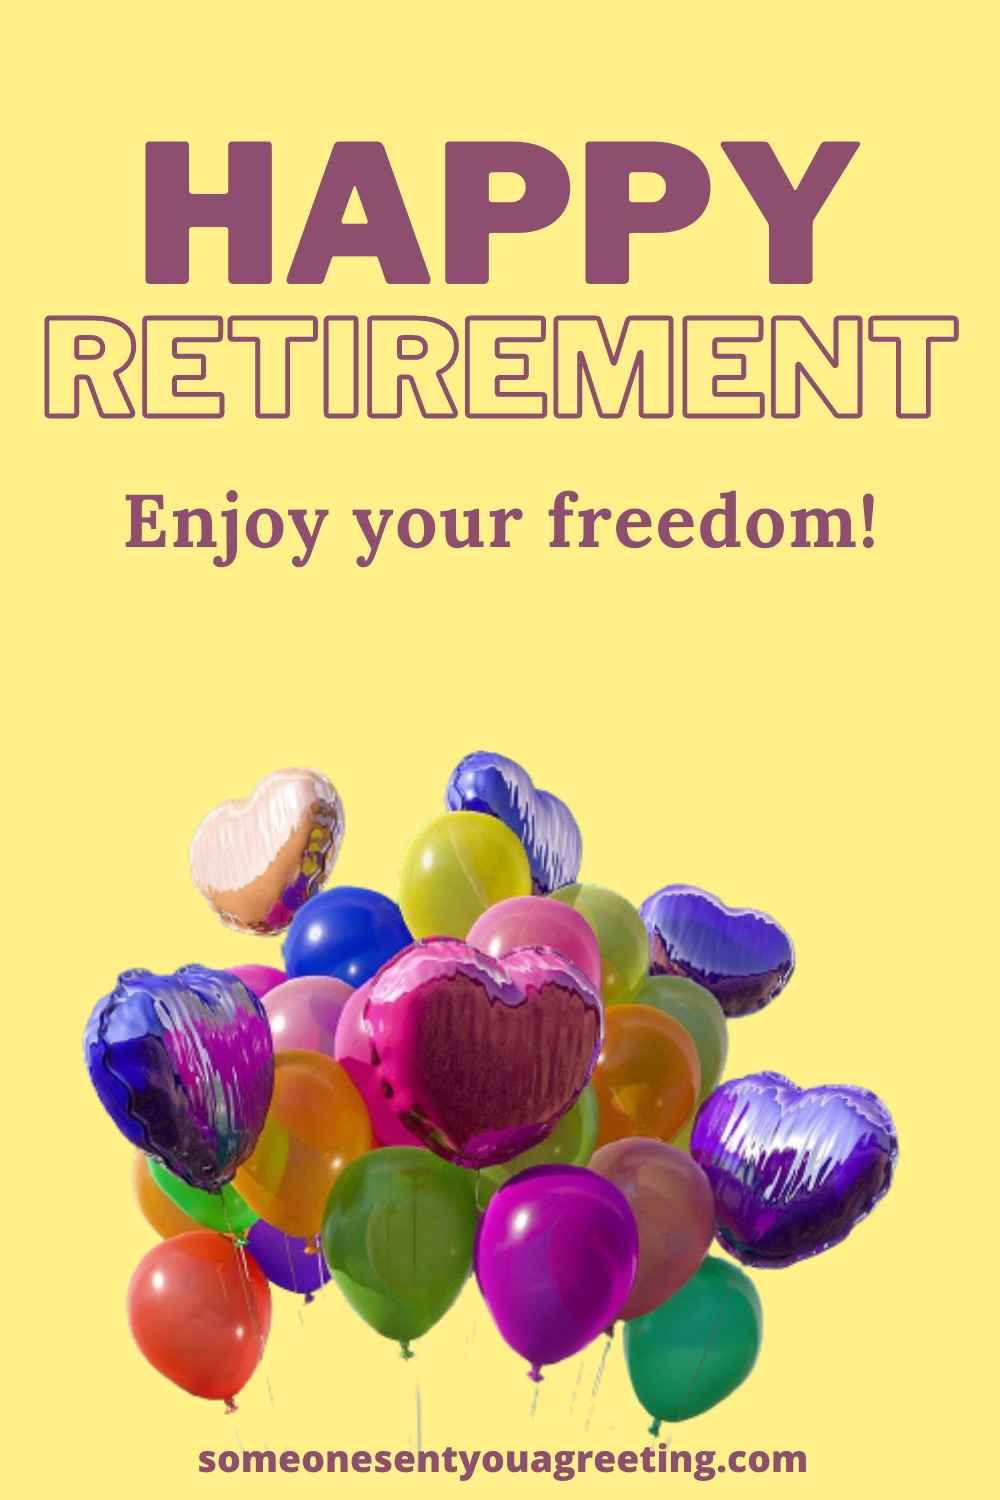 Happy retirement and enjoy your freedom